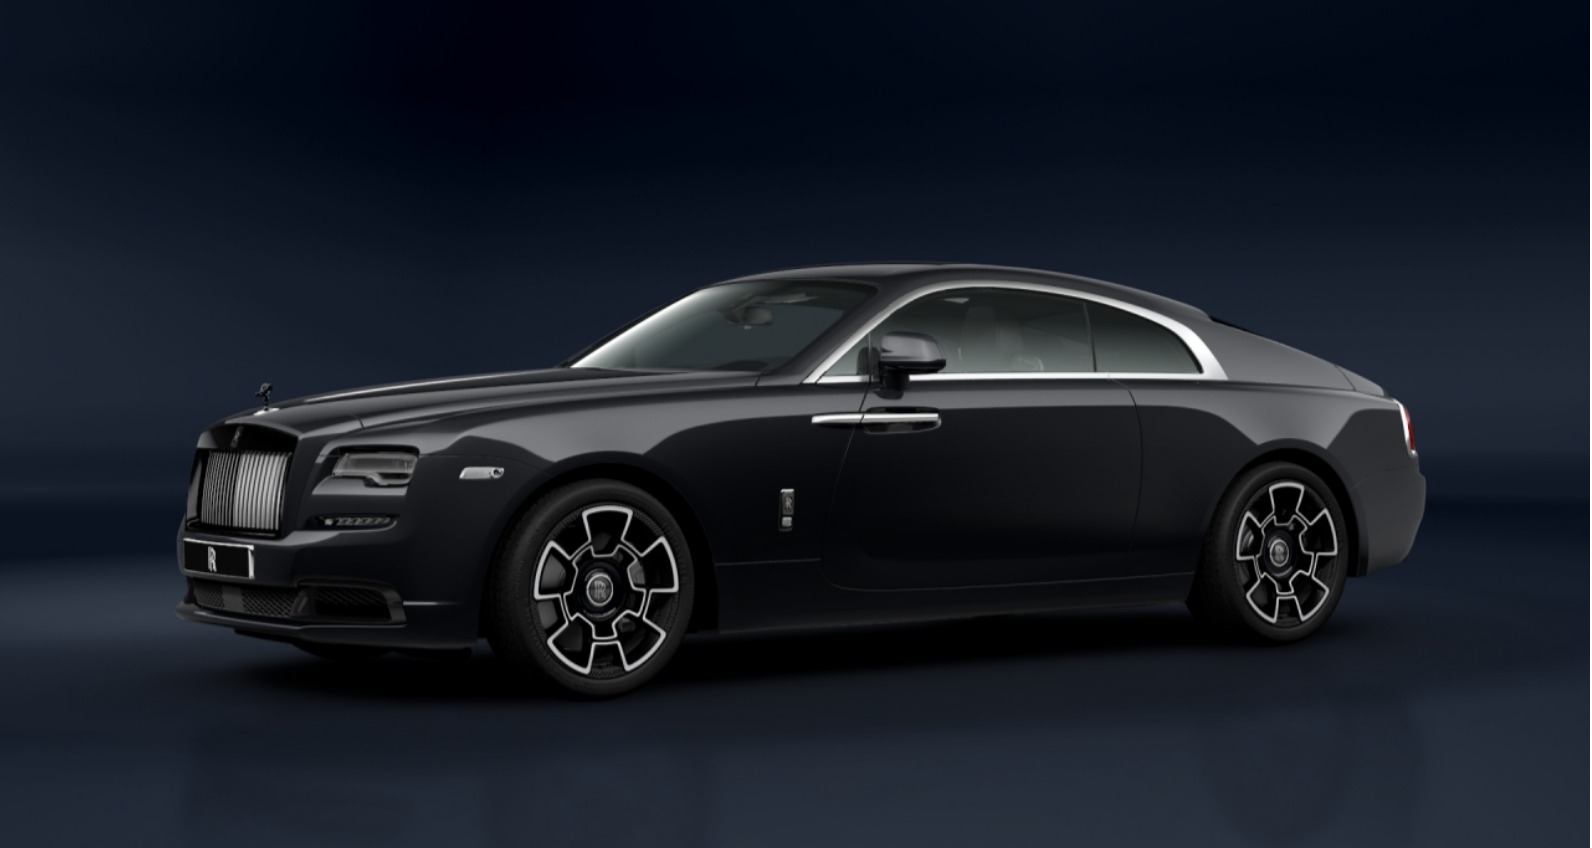 The 2021 RollsRoyce Ghost Is Robb Reports Luxury Car of the Year  Robb  Report